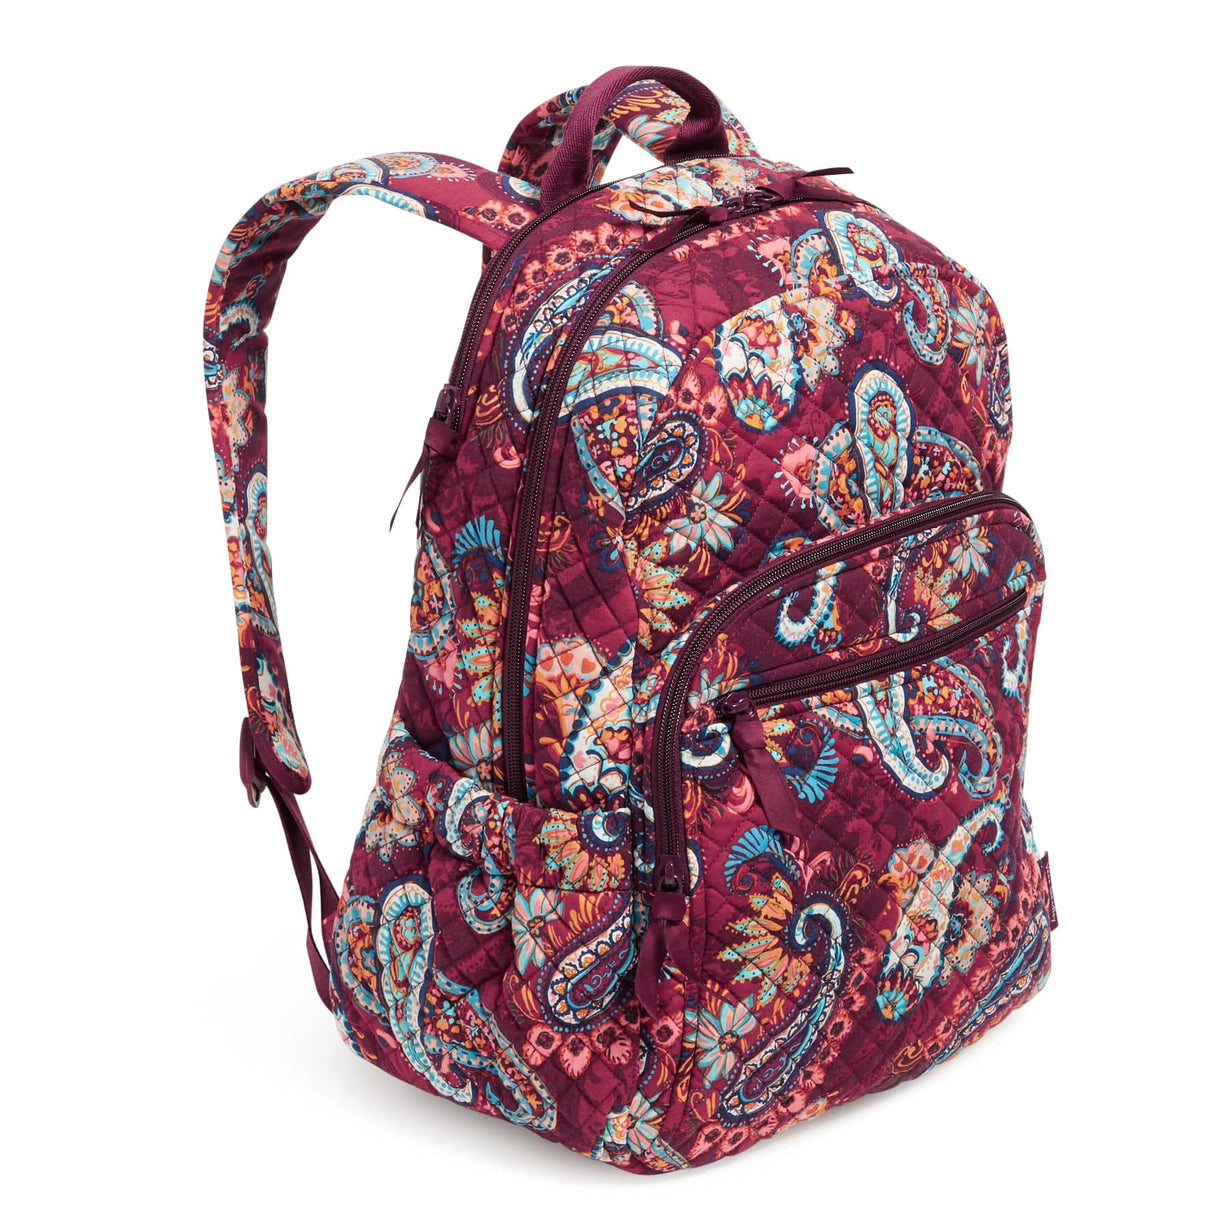 Shop Vera Bradley Iconic Campus Backpack, Foi – Luggage Factory